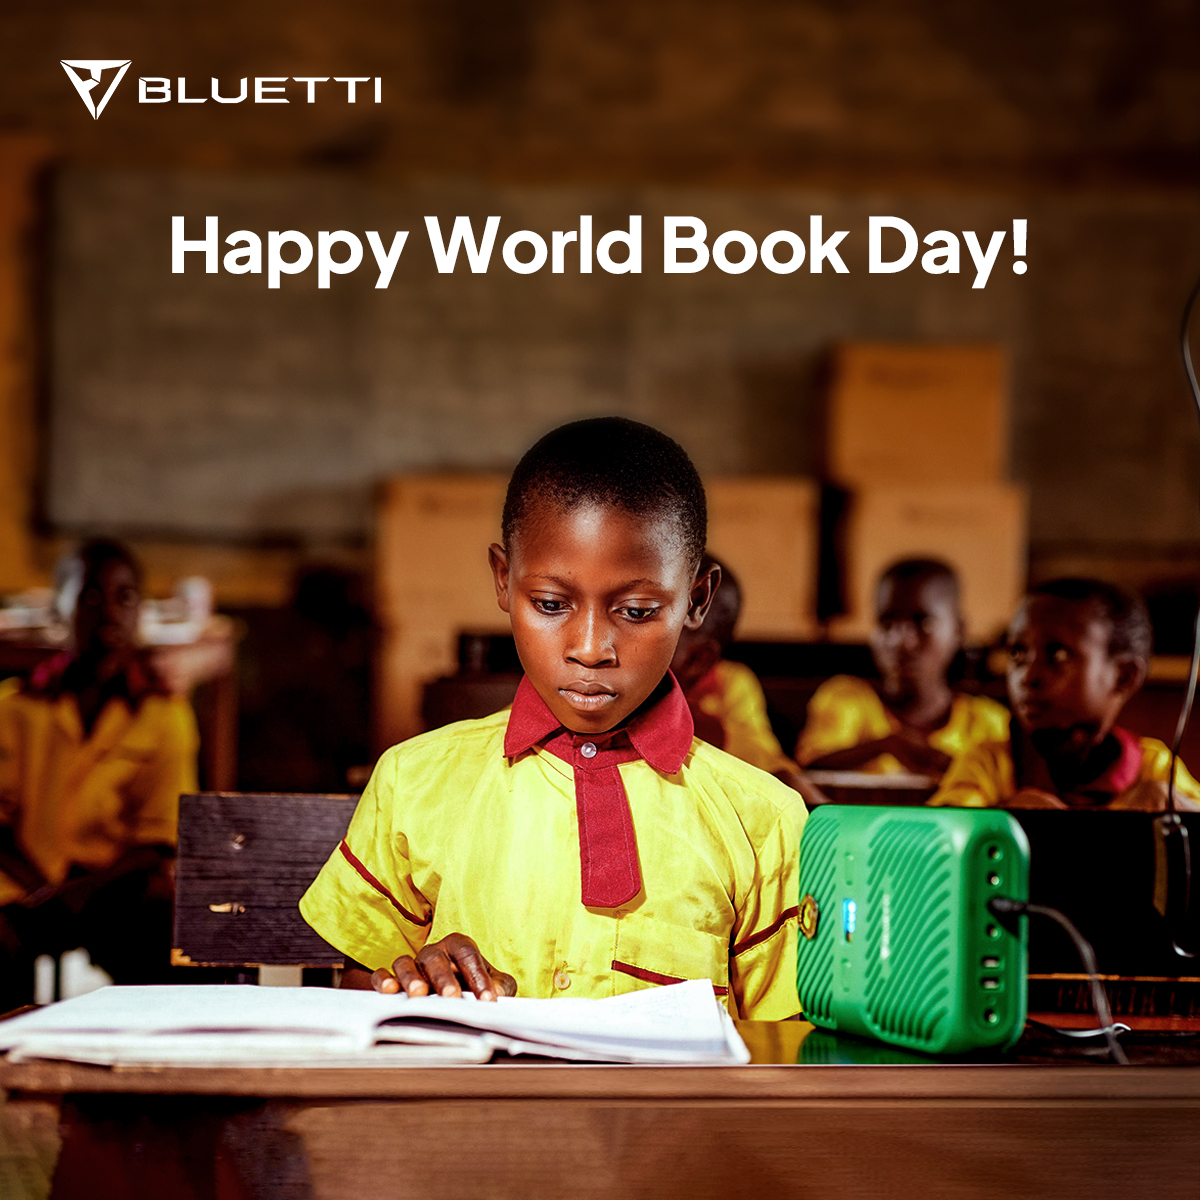 'Books are immortal treasures, passed down from generation to generation, forever enduring.' - Beverly Sills📚

Happy World Book Day! Did you read today?😄

#WorldBookDay #BookwormsUnite #ReadingIsMagic ##southafrica
 #africa #BLUETTIafrica